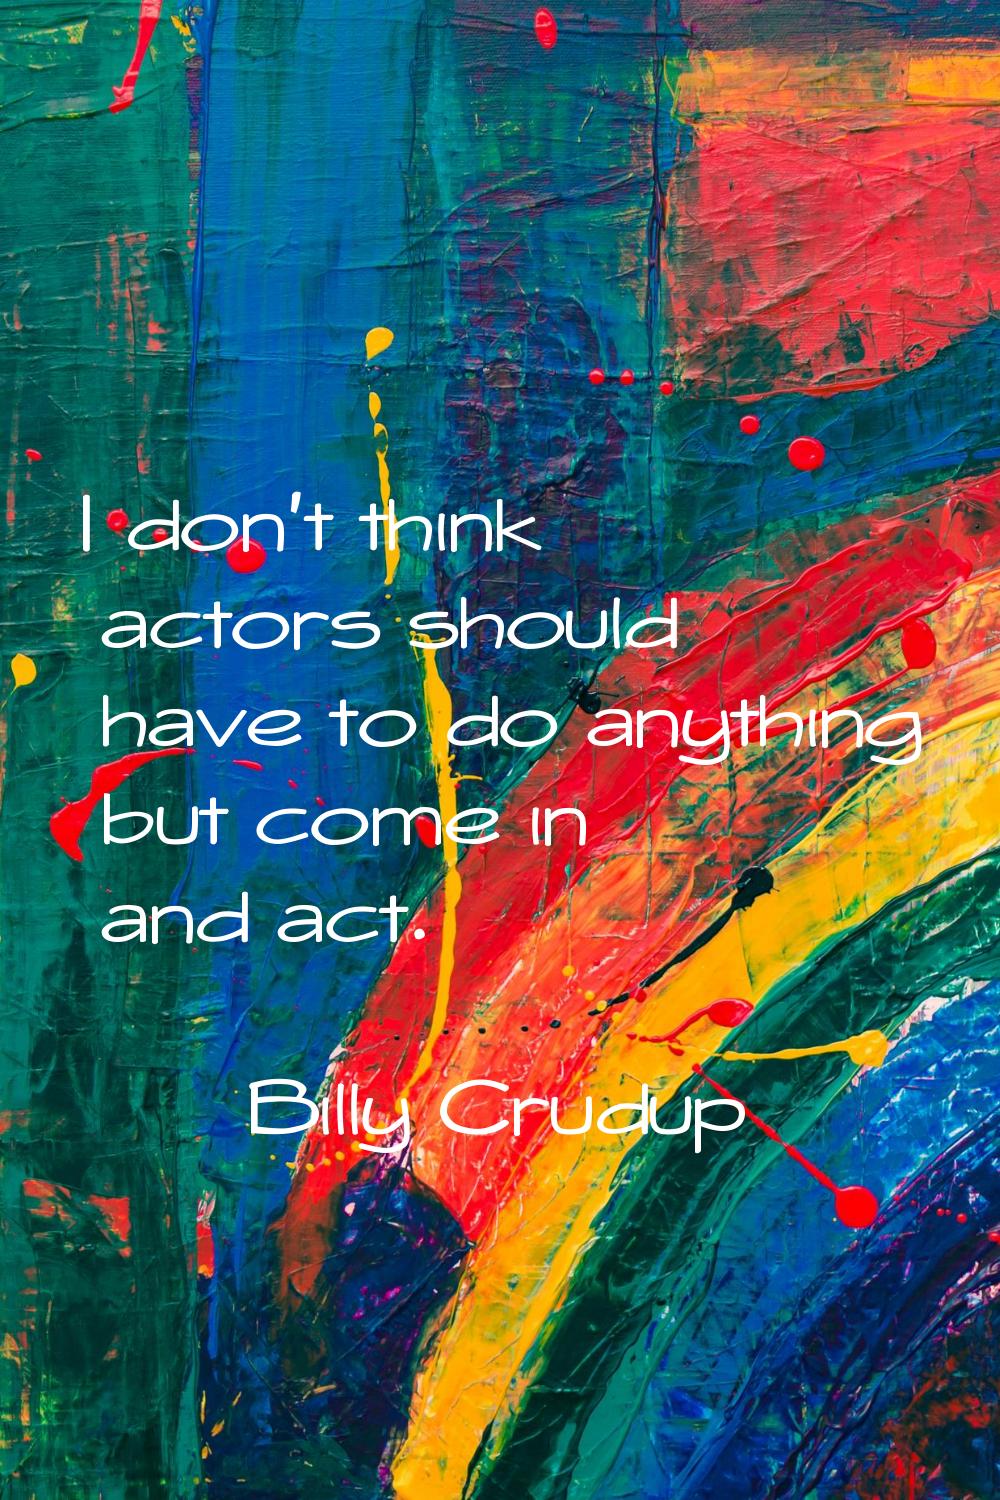 I don't think actors should have to do anything but come in and act.